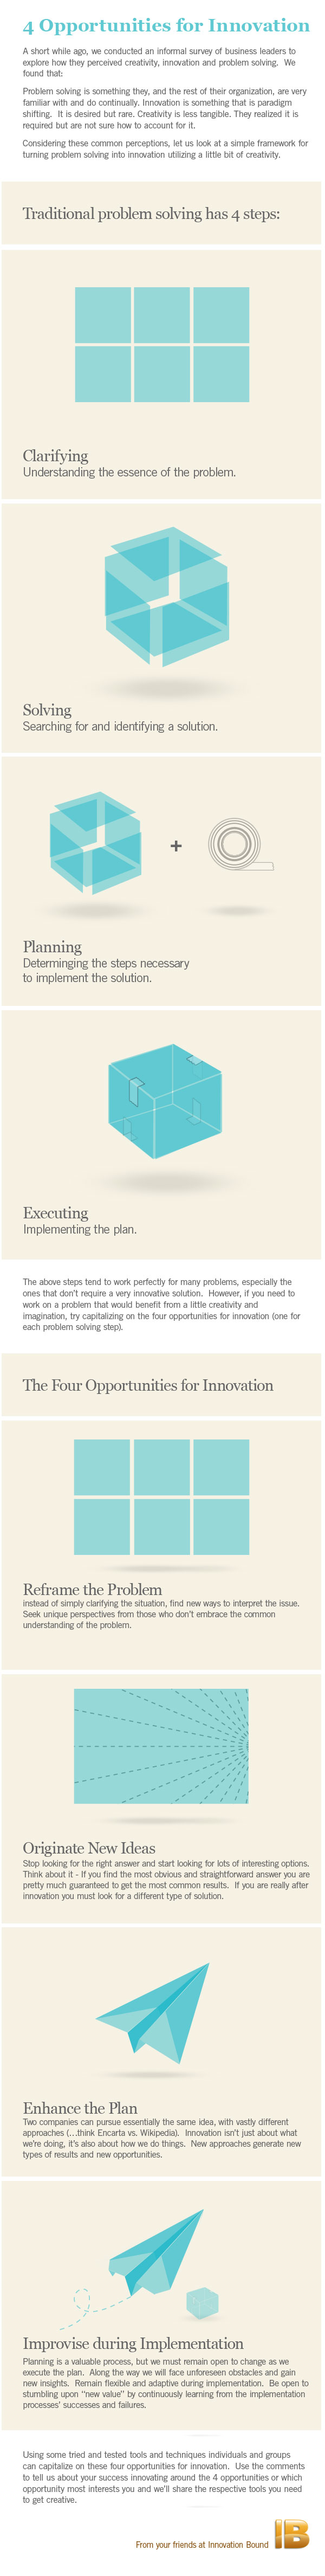 4 Opportunities for Innovation